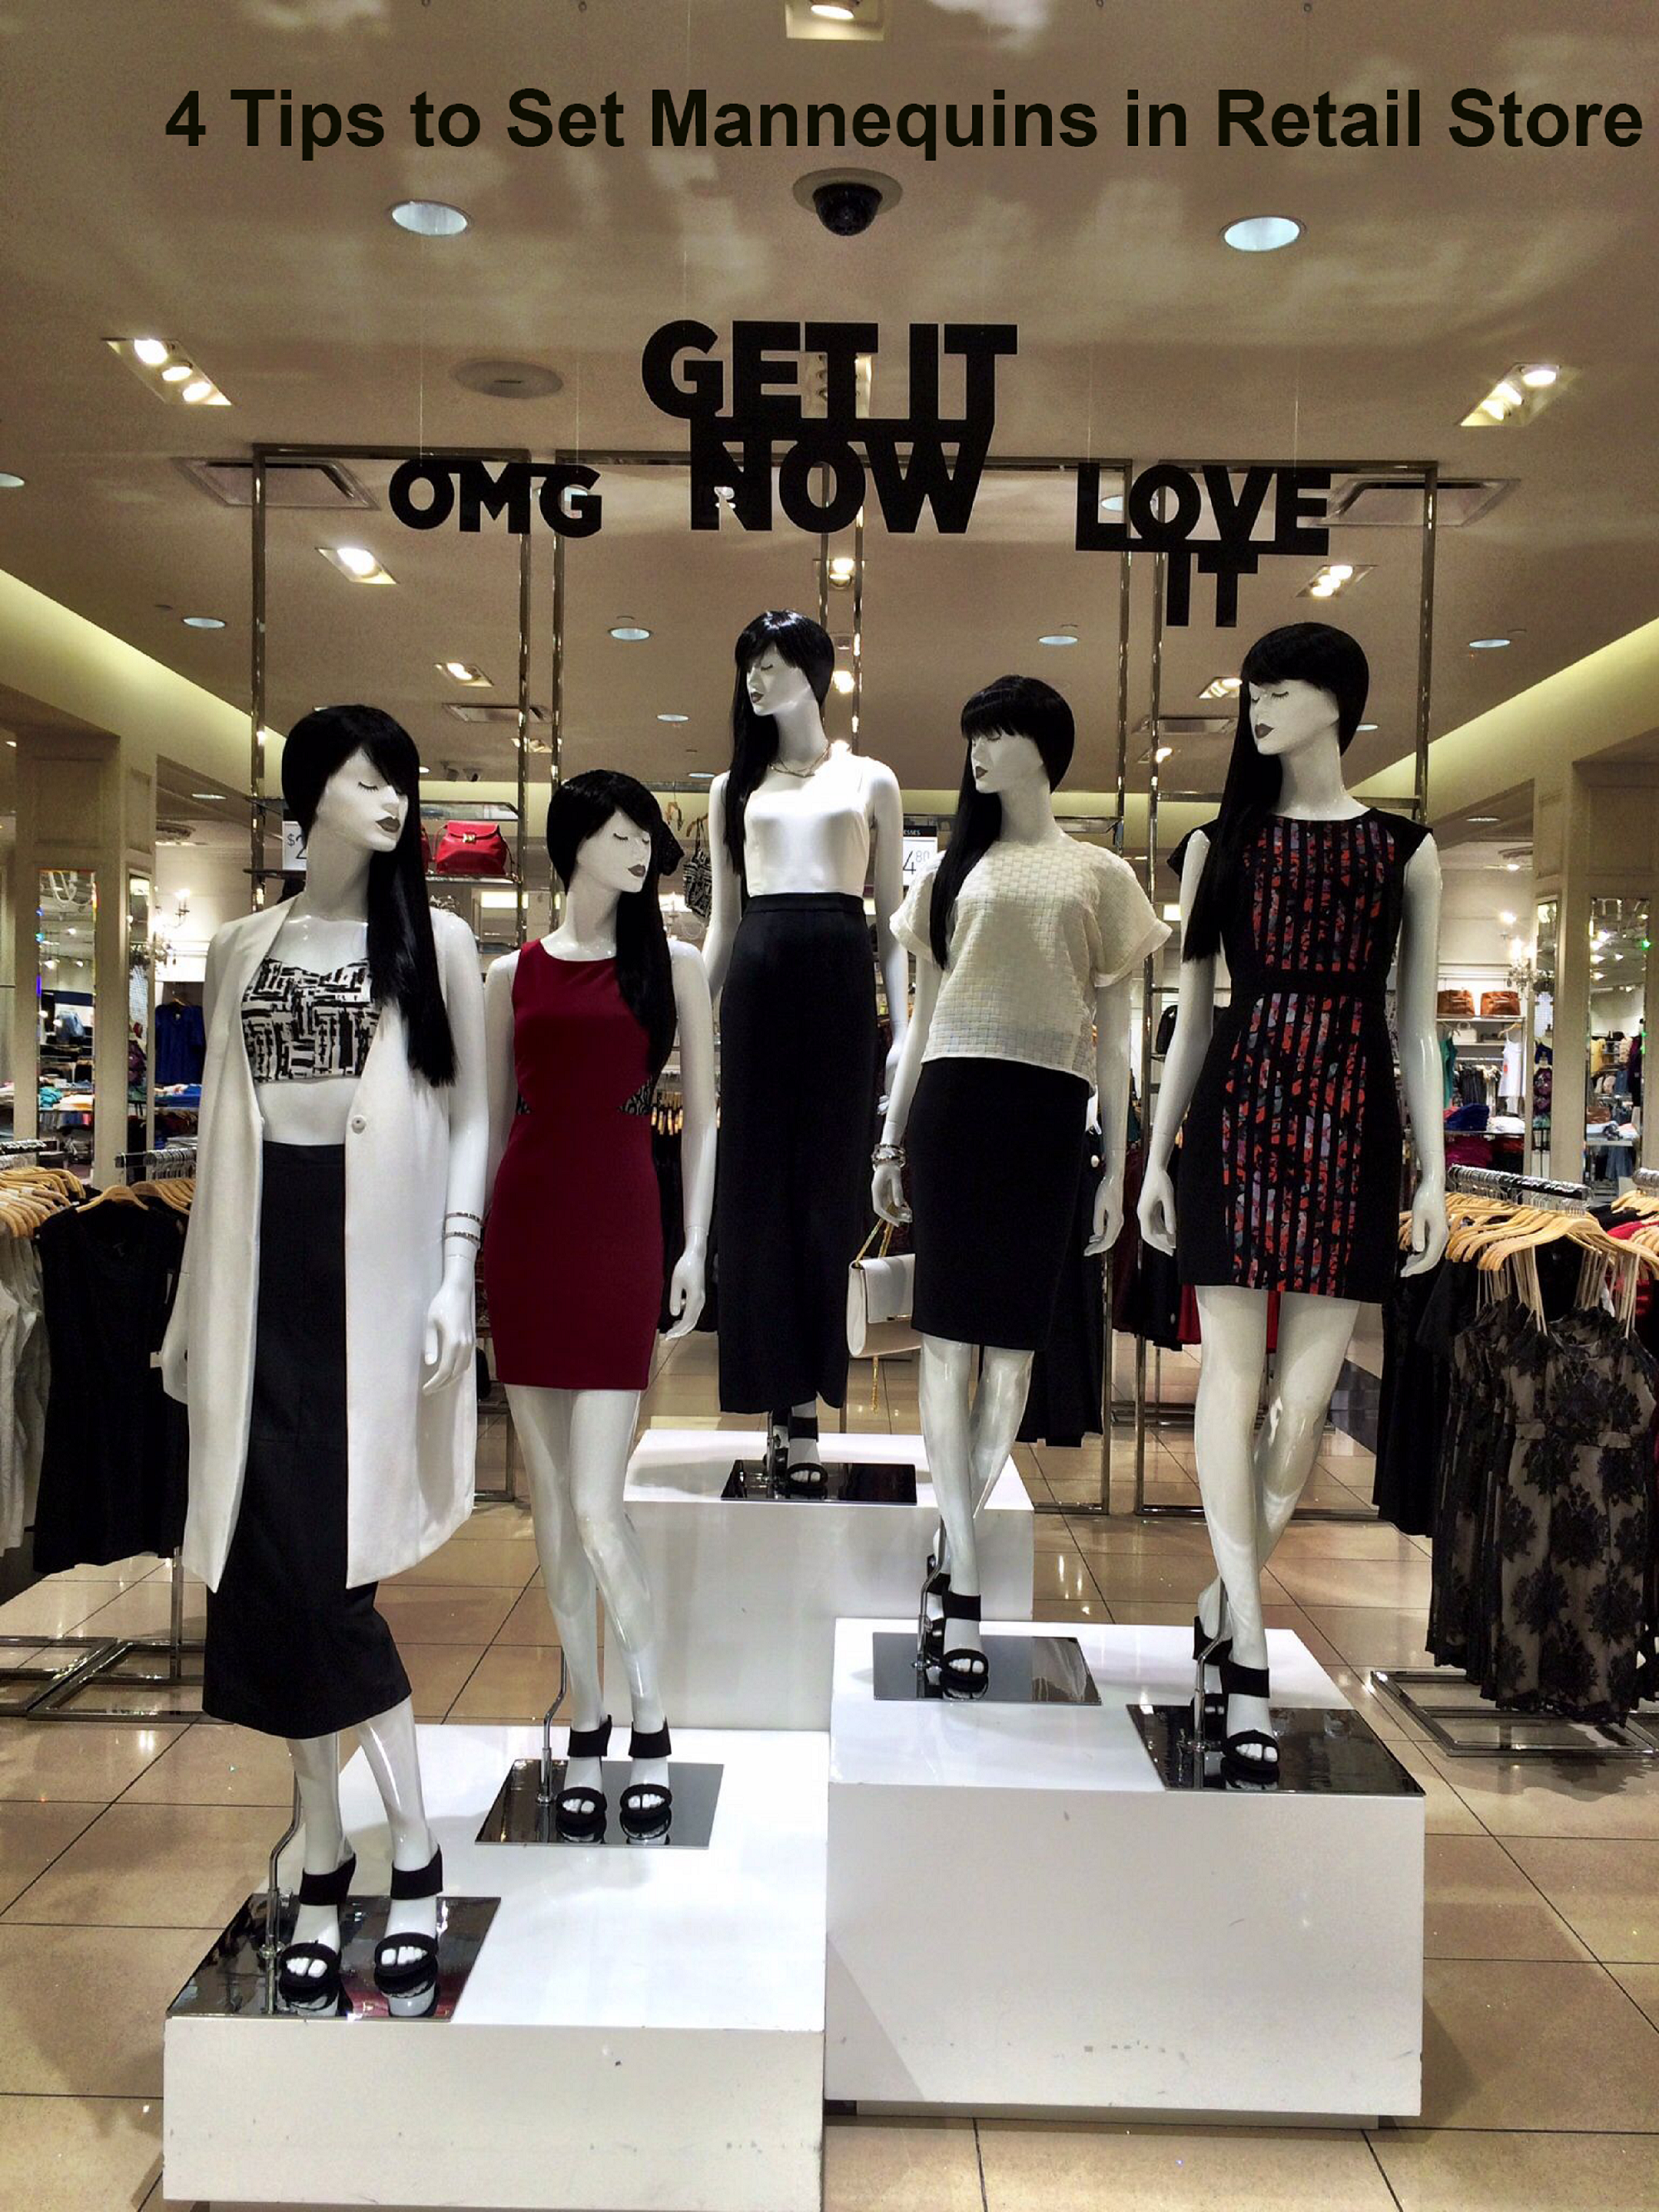 4 Tips to Set Mannequins in Retail Store for Perfect Display